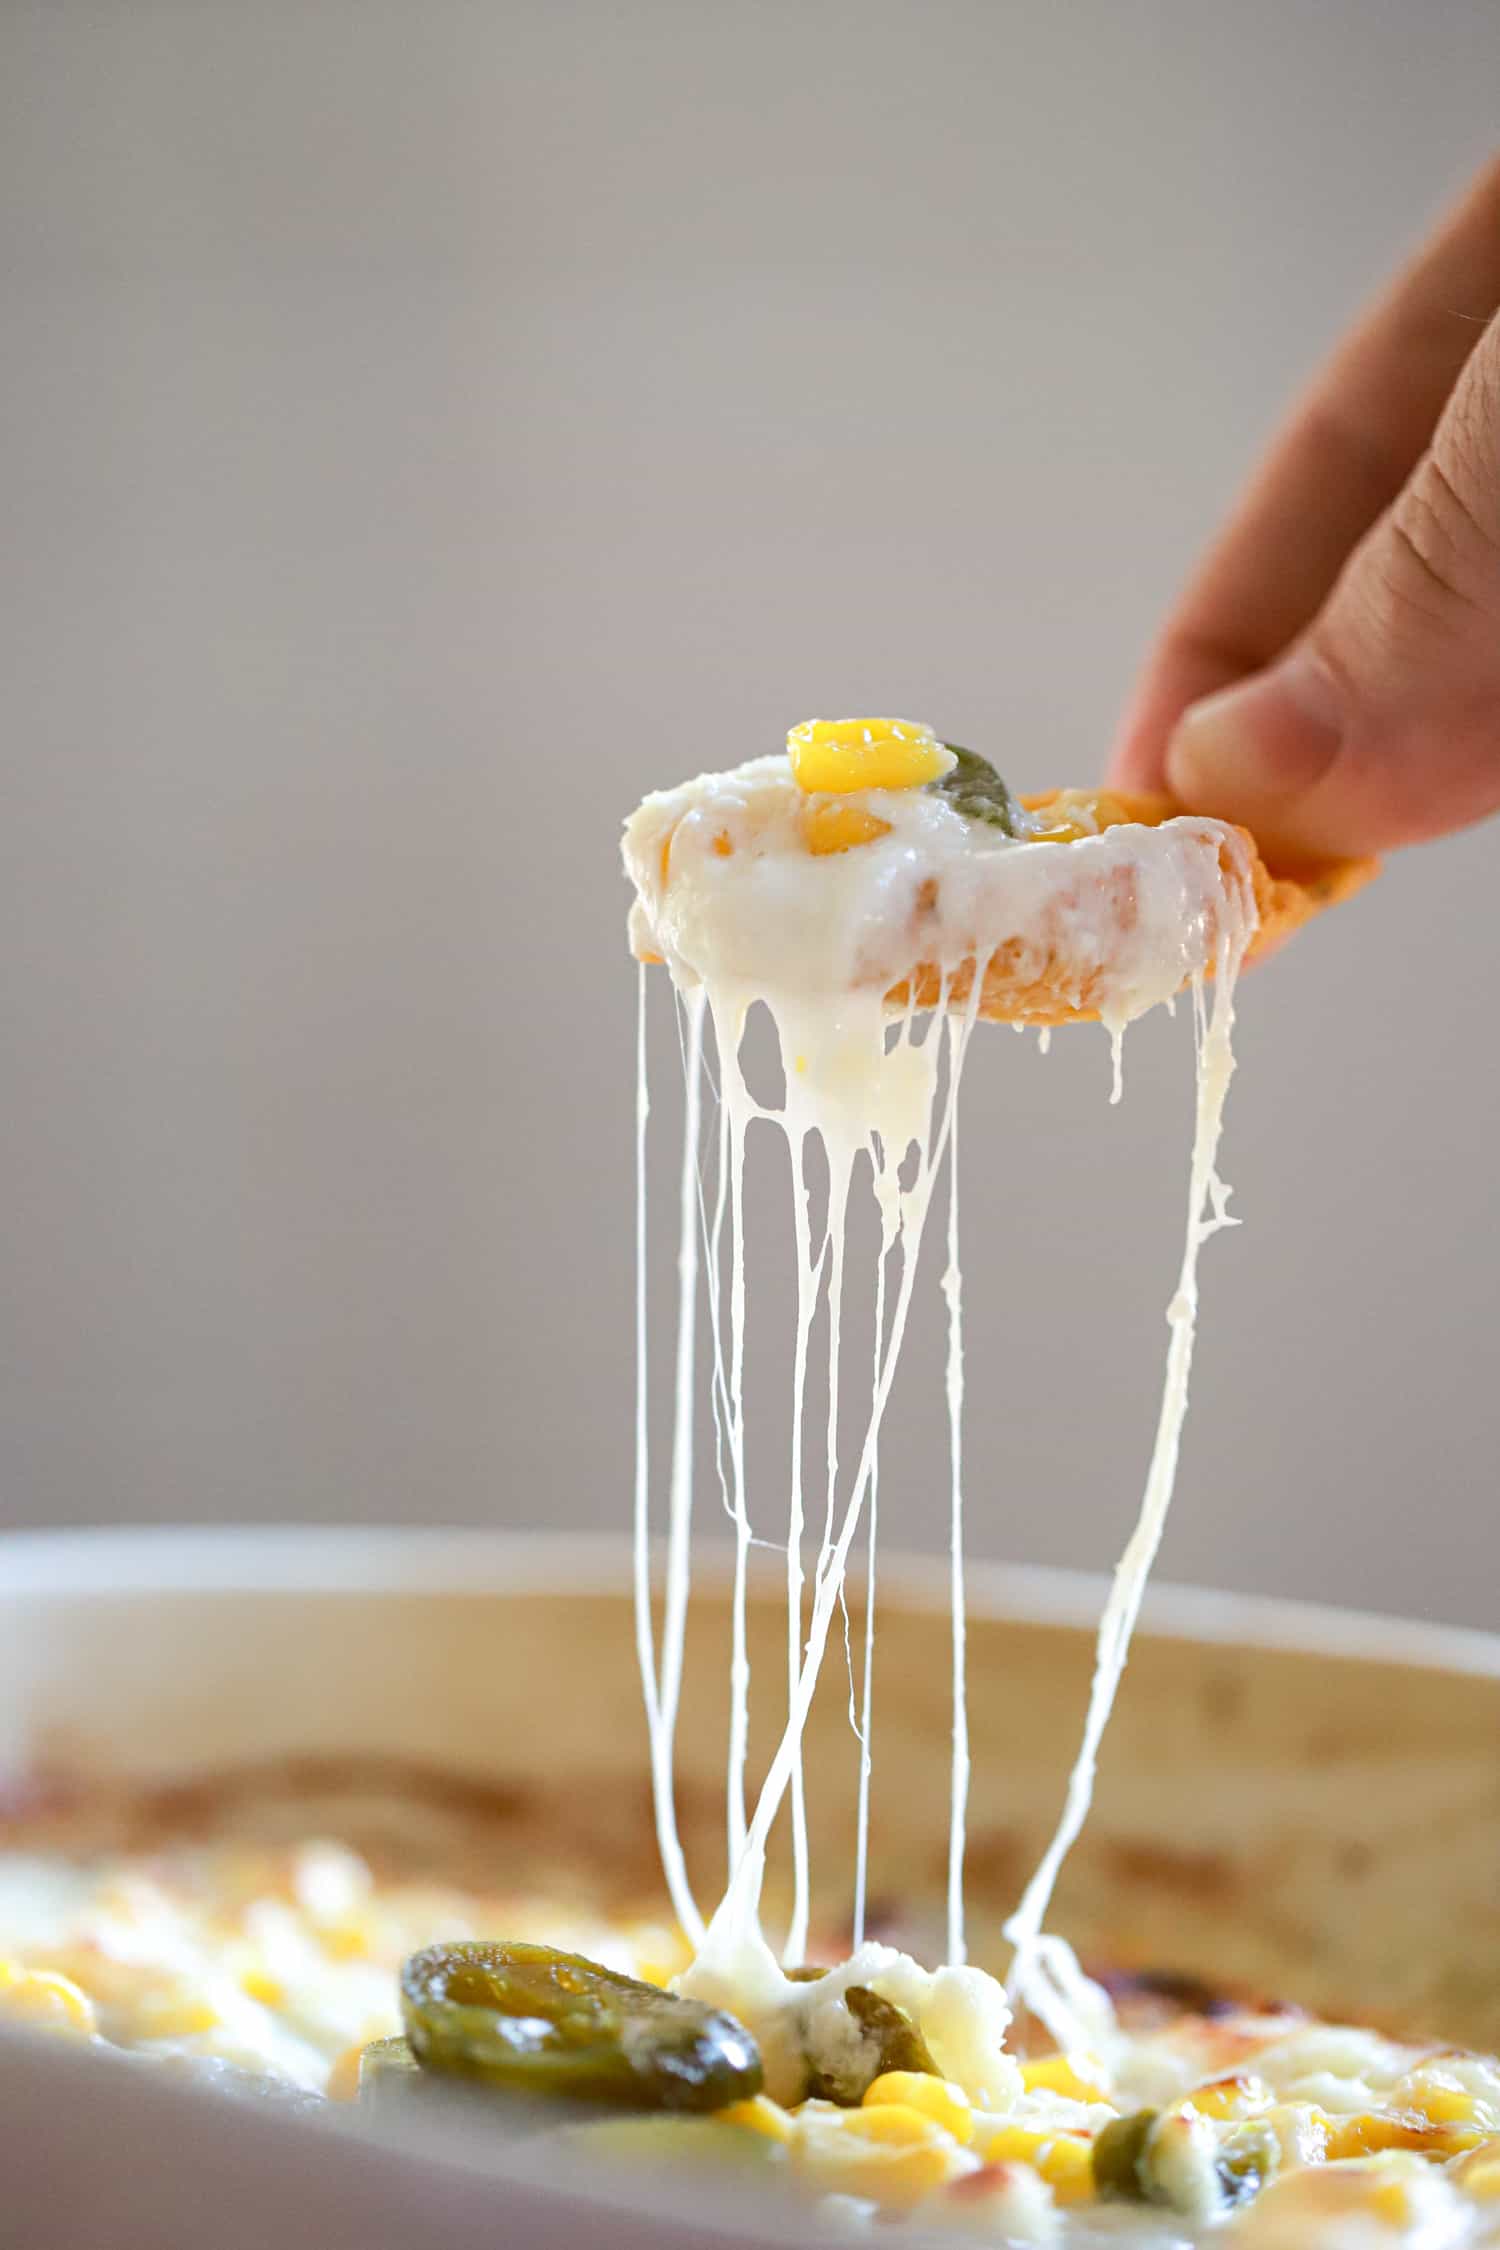 hand scooping cheesy corn dip in air on white background.